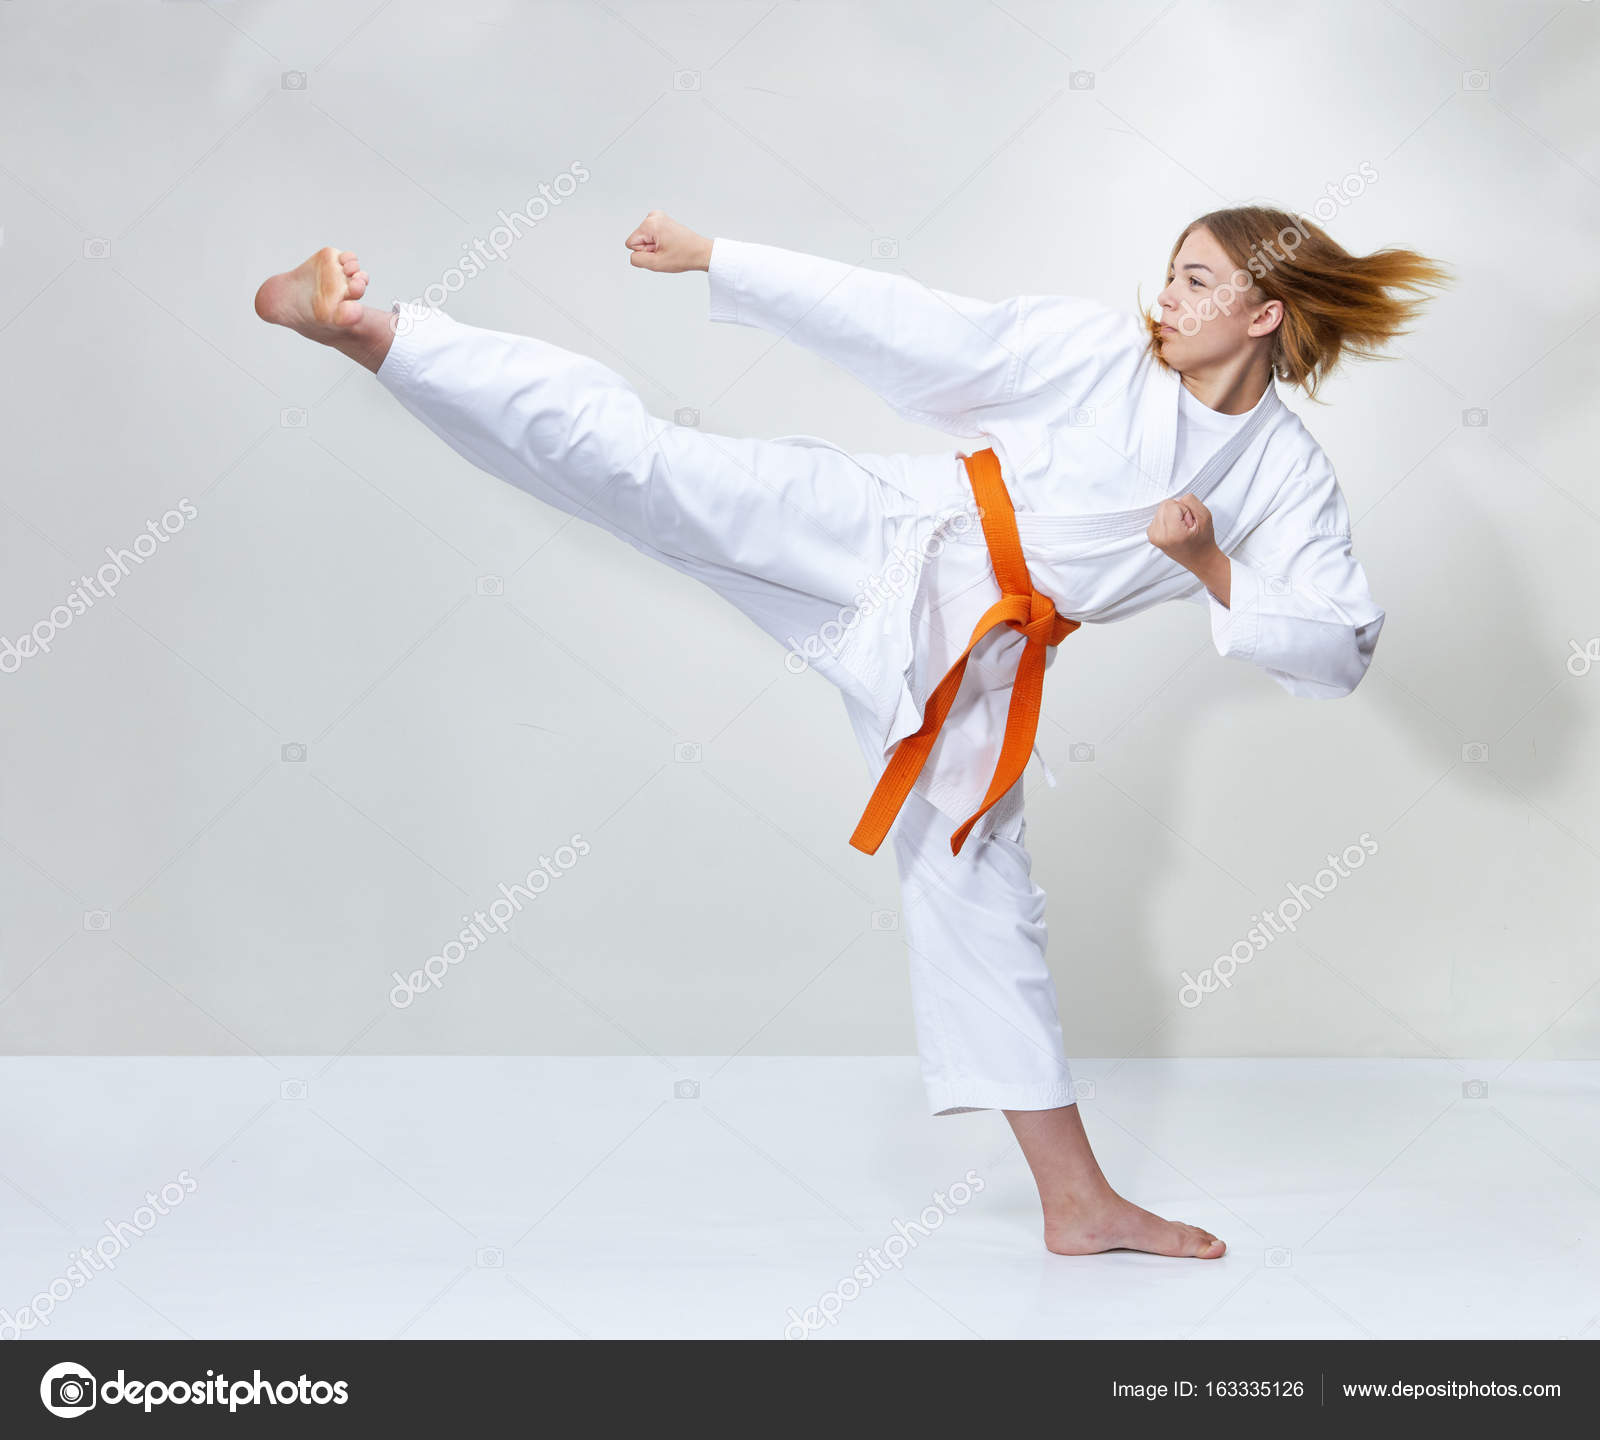 With an orange belt, athlete trains a Stock Photo by 163335126